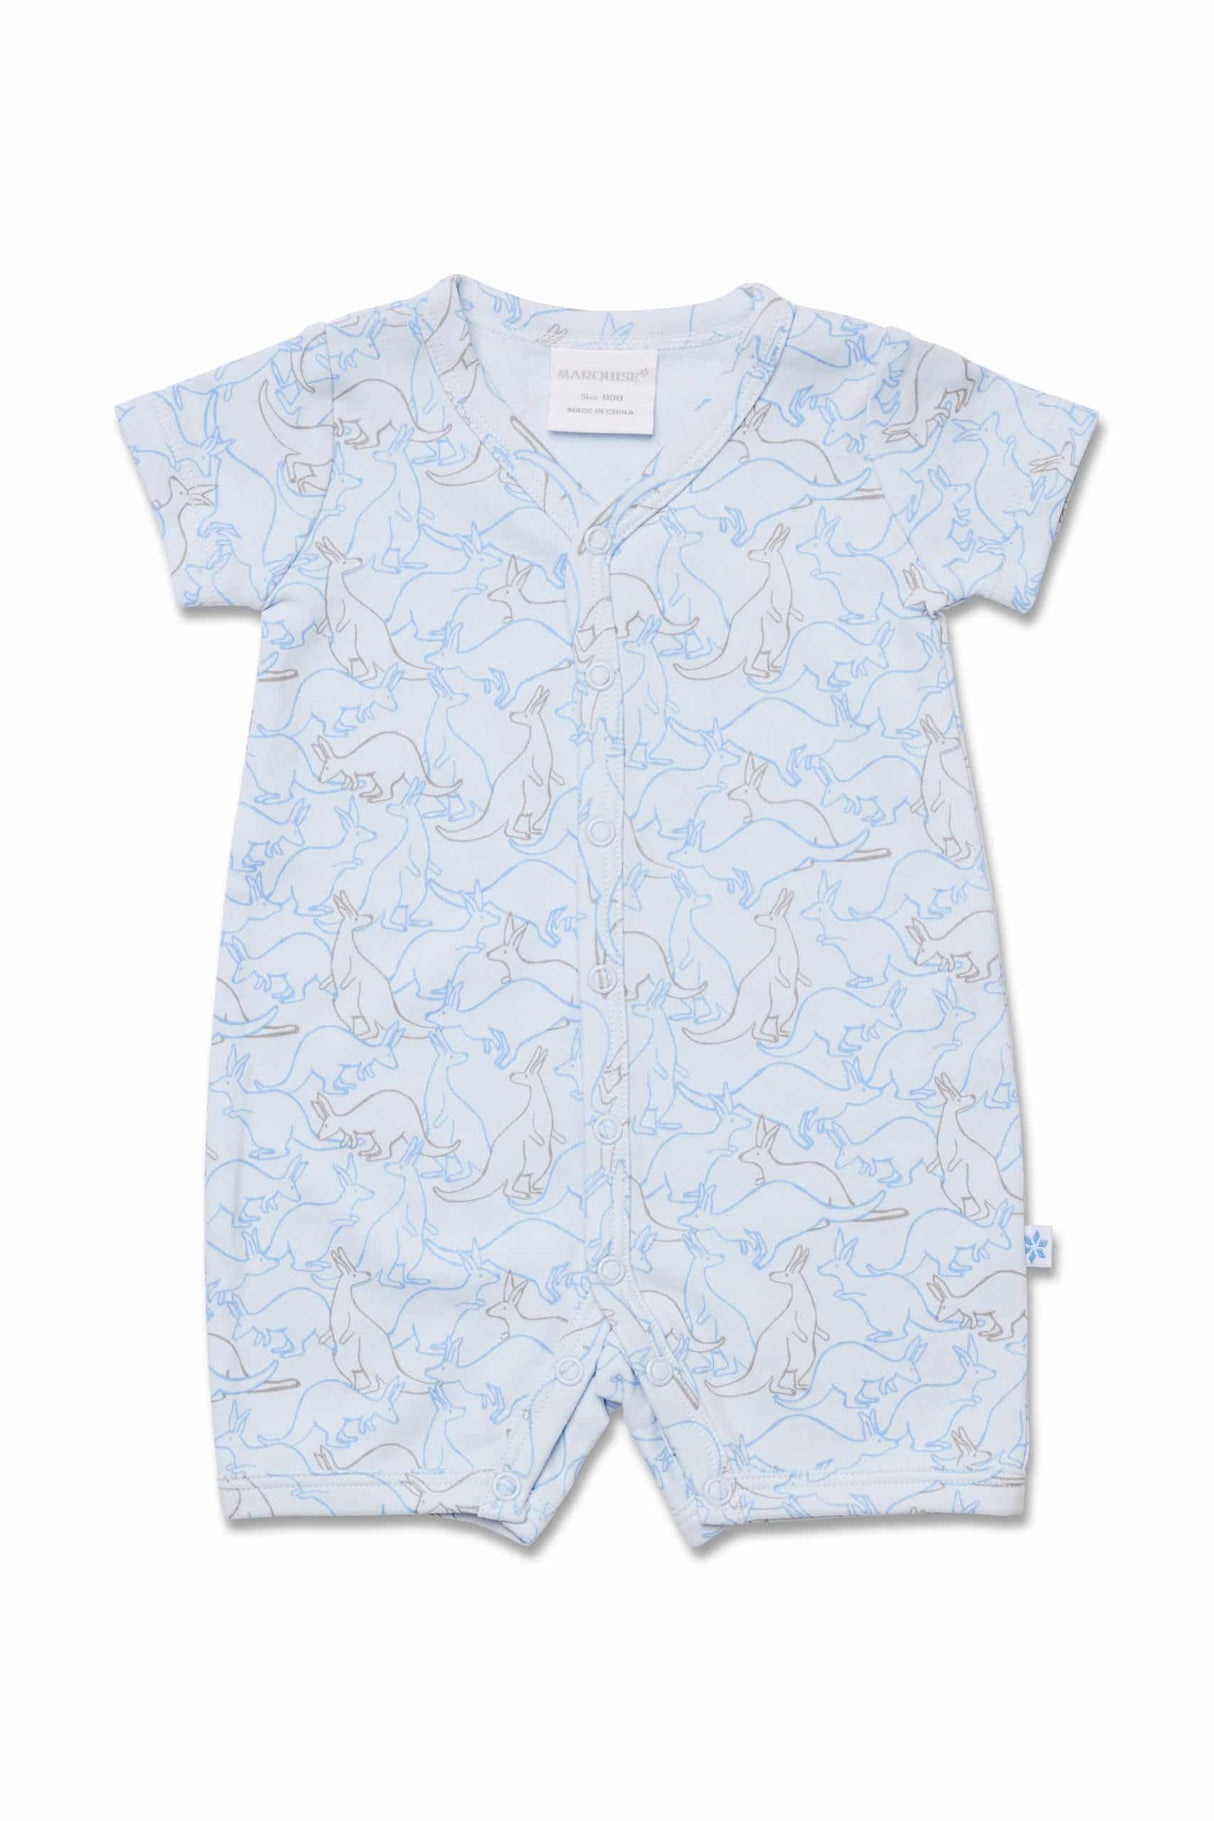 Marquise Kangaroo Romper and Whale Bodysuit 2 Pack